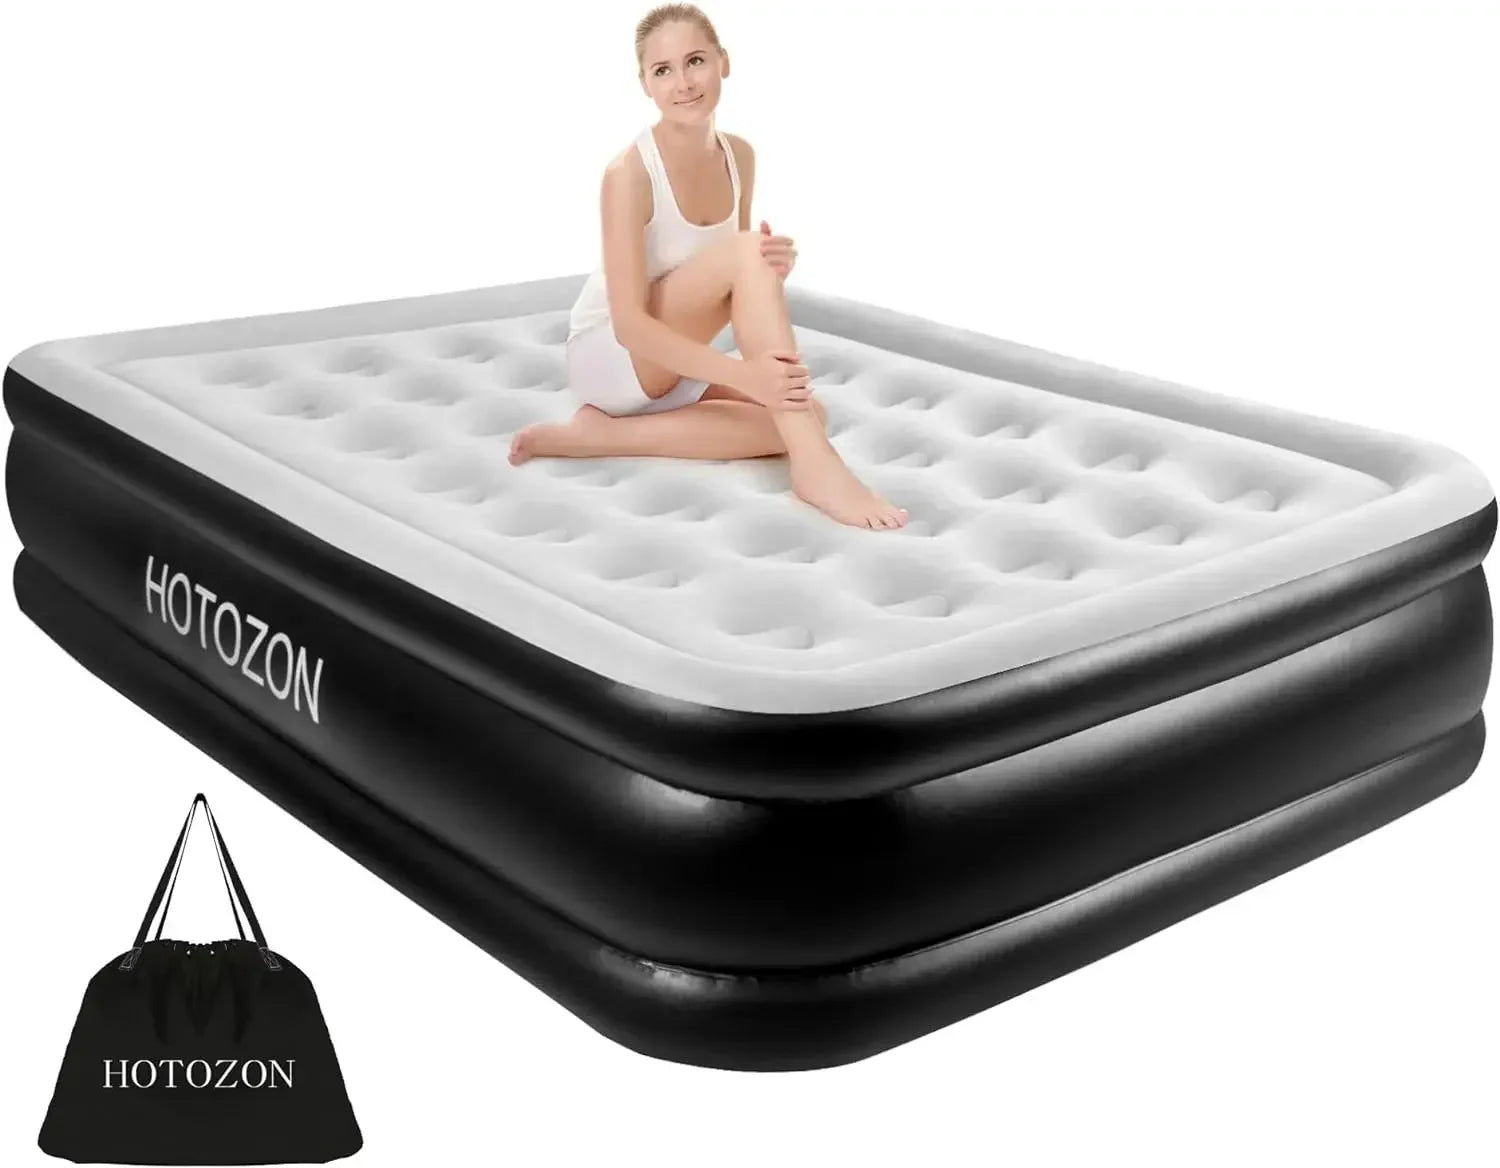 Luxury Queen Inflatable Mattress with Built-in Pump for Home Tatami